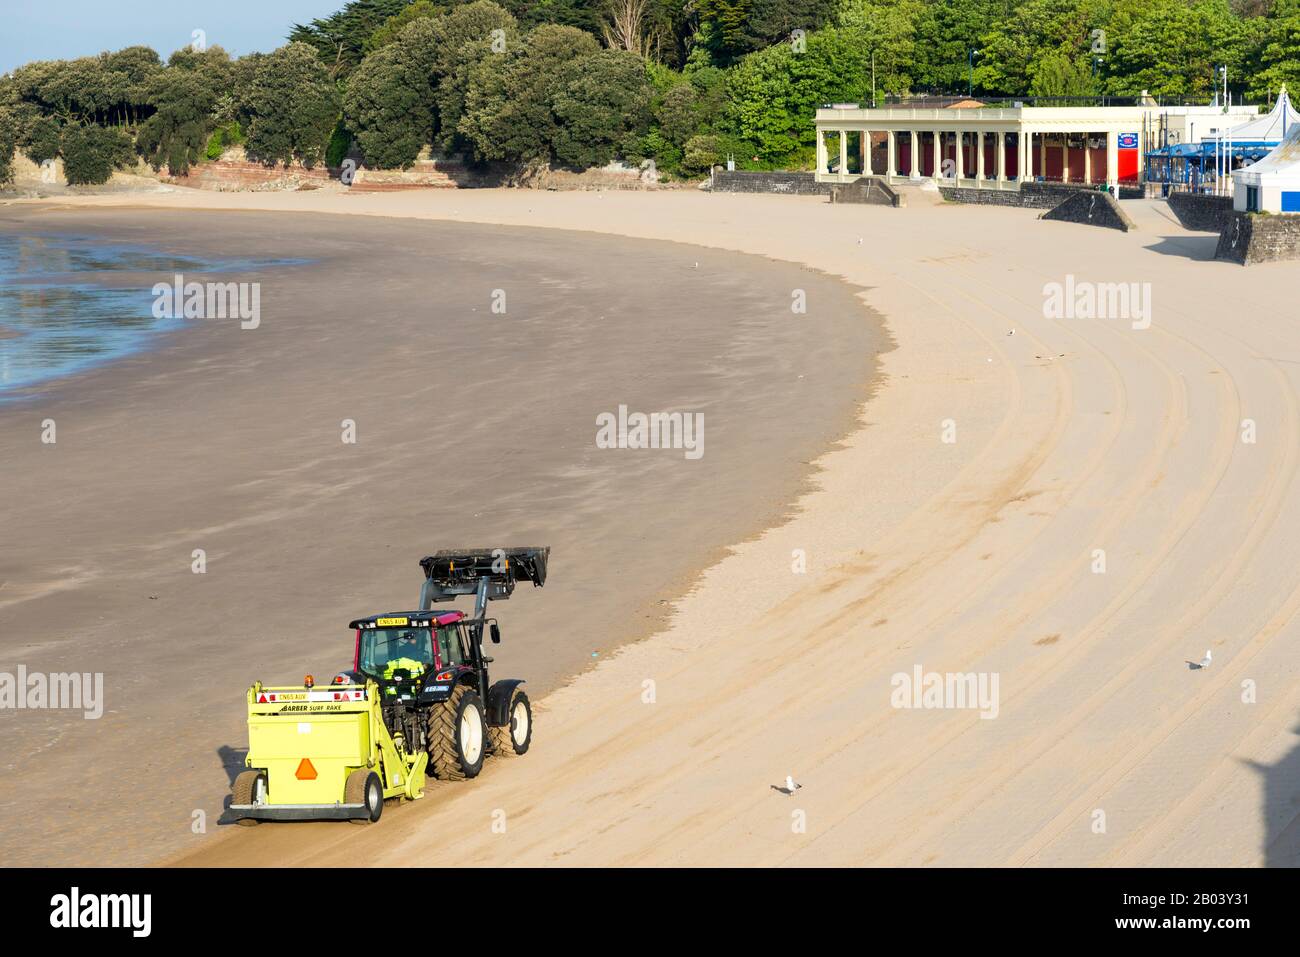 Whitmore Bay beach at Barry Island, Wales,early on a bright sunny summer morning being cleaned of litter by a red Tractor pulling a Barber Surf Rake. Stock Photo